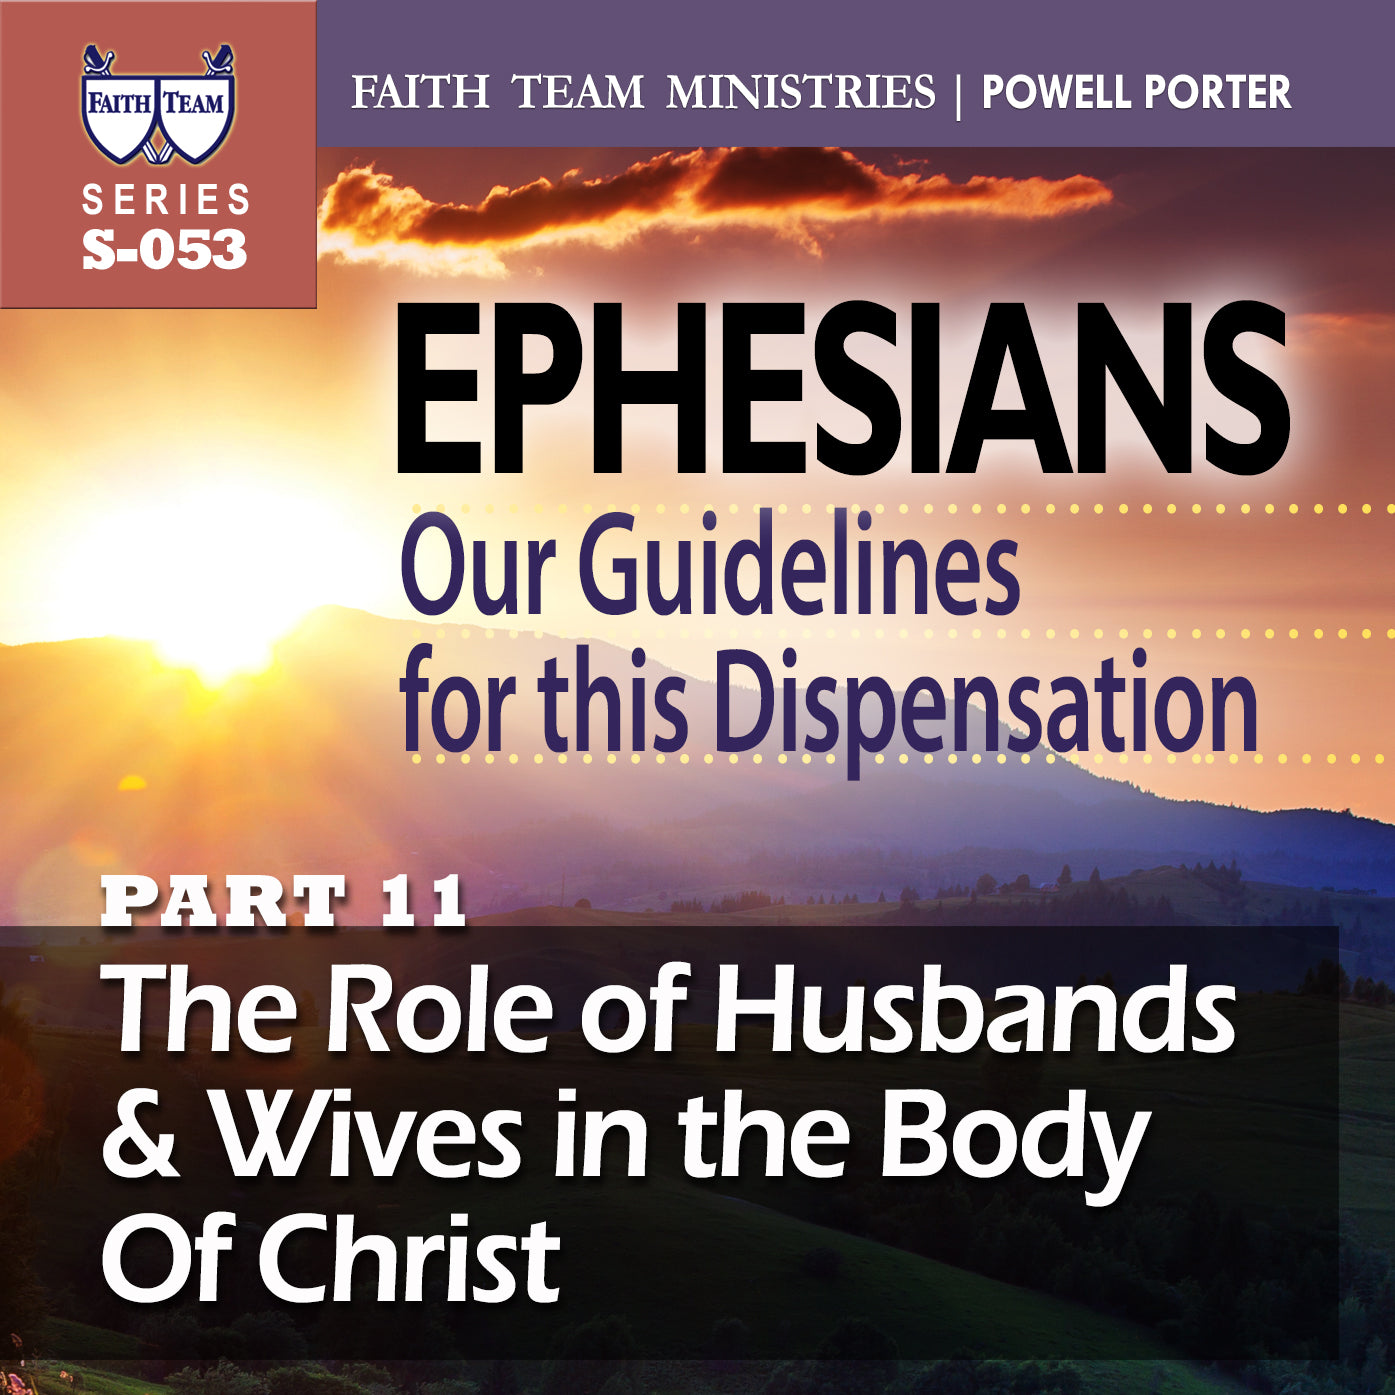 EPHESIANS OUR GUIDELINES FOR THIS NEW DISPENSATION | Part 11: The Role Of Husbands And Wives In The Body Of Christ